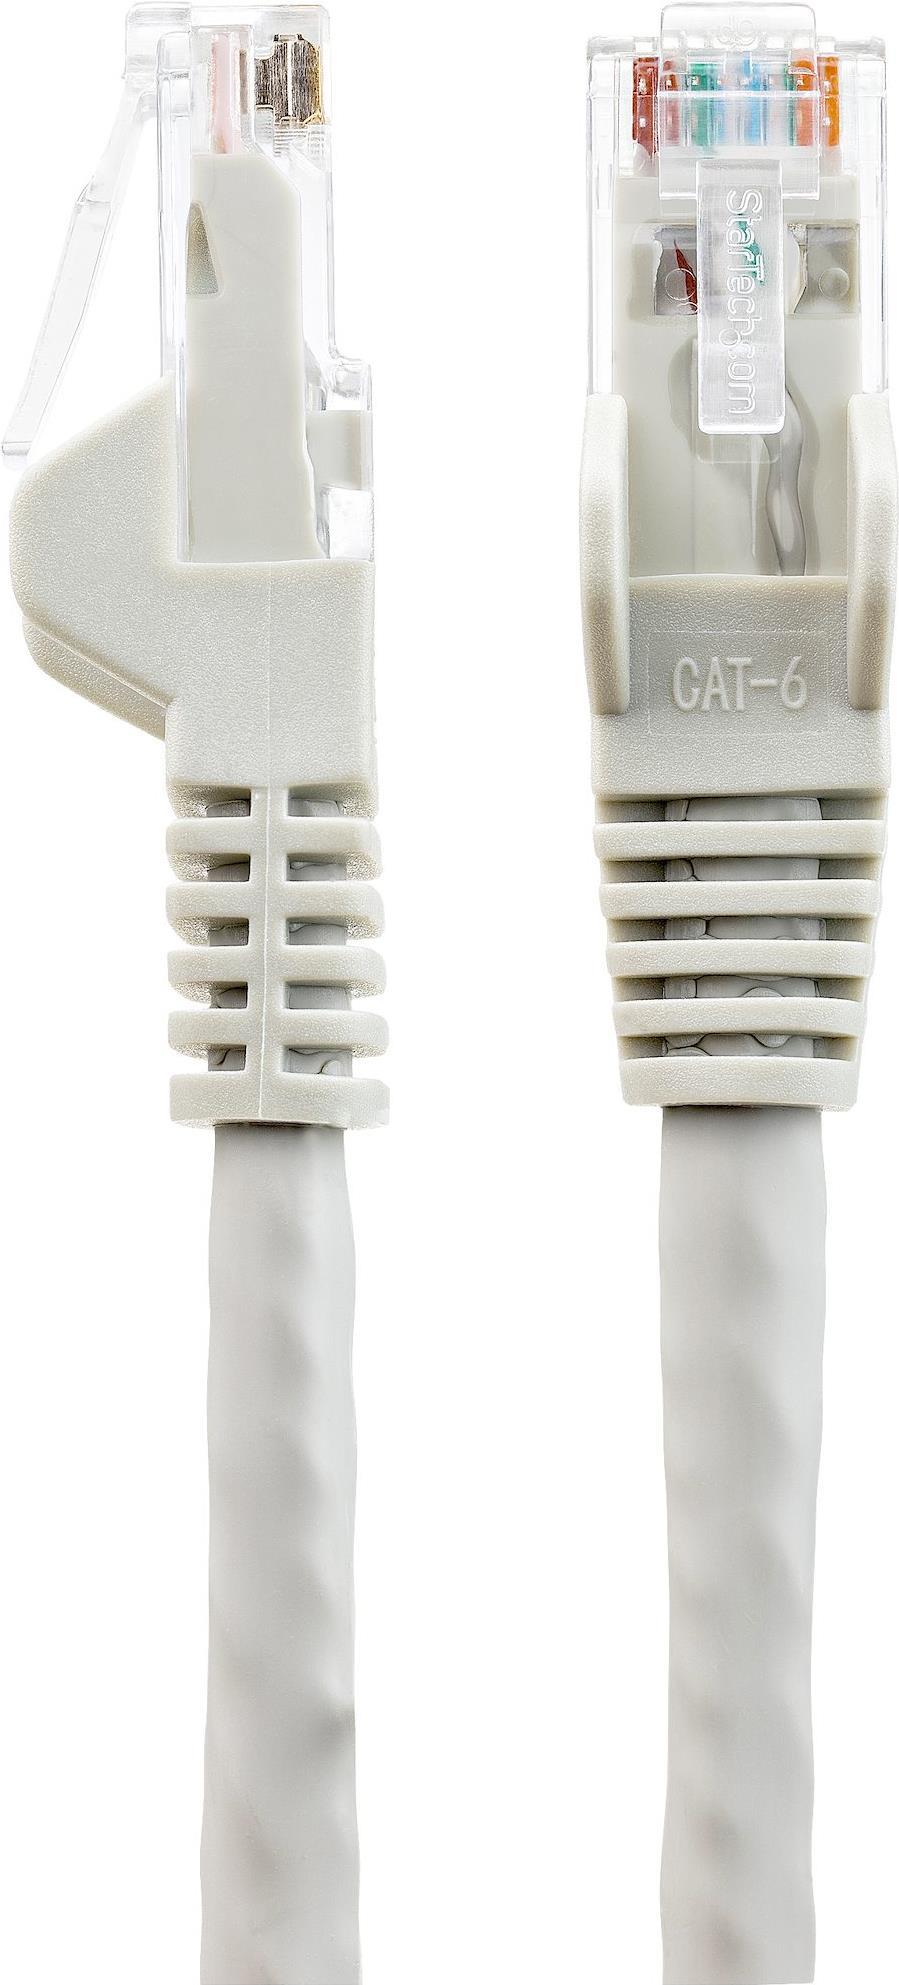 StarTech.com 7m LSZH CAT6 Ethernet Cable, 10 Gigabit Snagless RJ45 100W PoE Network Patch Cord with Strain Relief, CAT 6 10GbE UTP, Grey, Individually Tested/ETL, Low Smoke Zero Halogen (N6LPATCH7MGR)